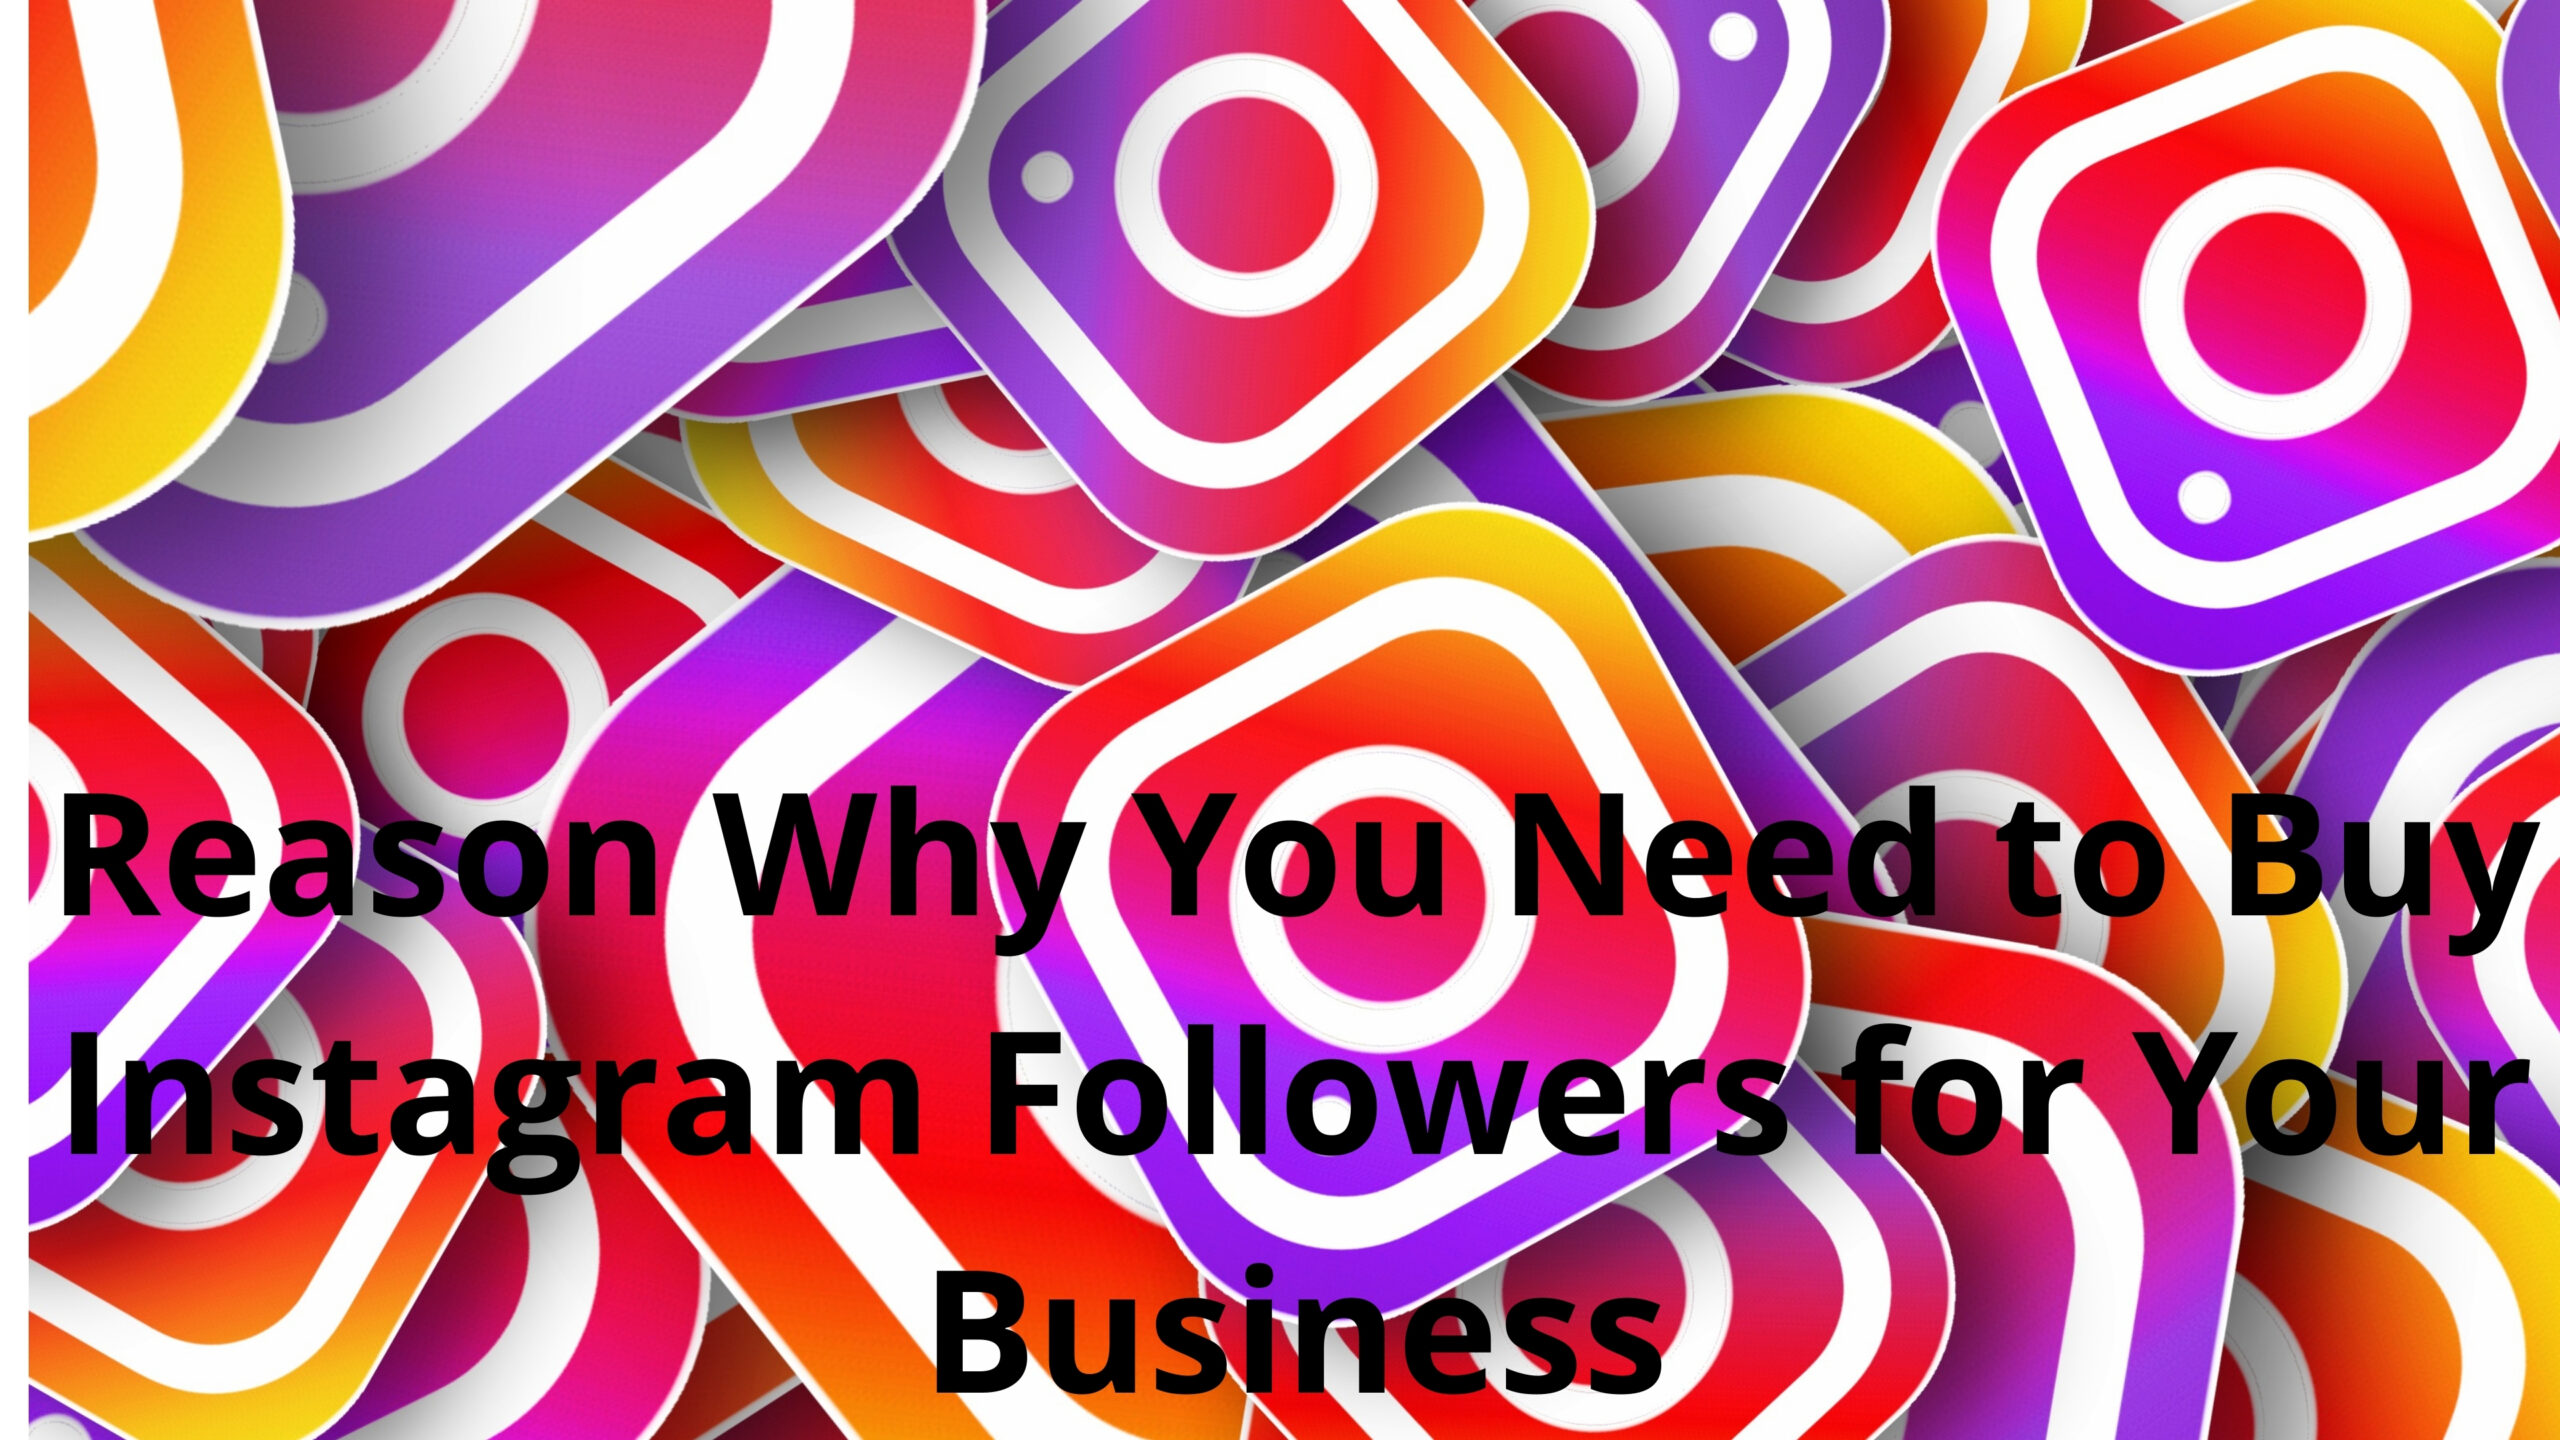 Reason Why You Need to Buy Instagram Followers for Your Business